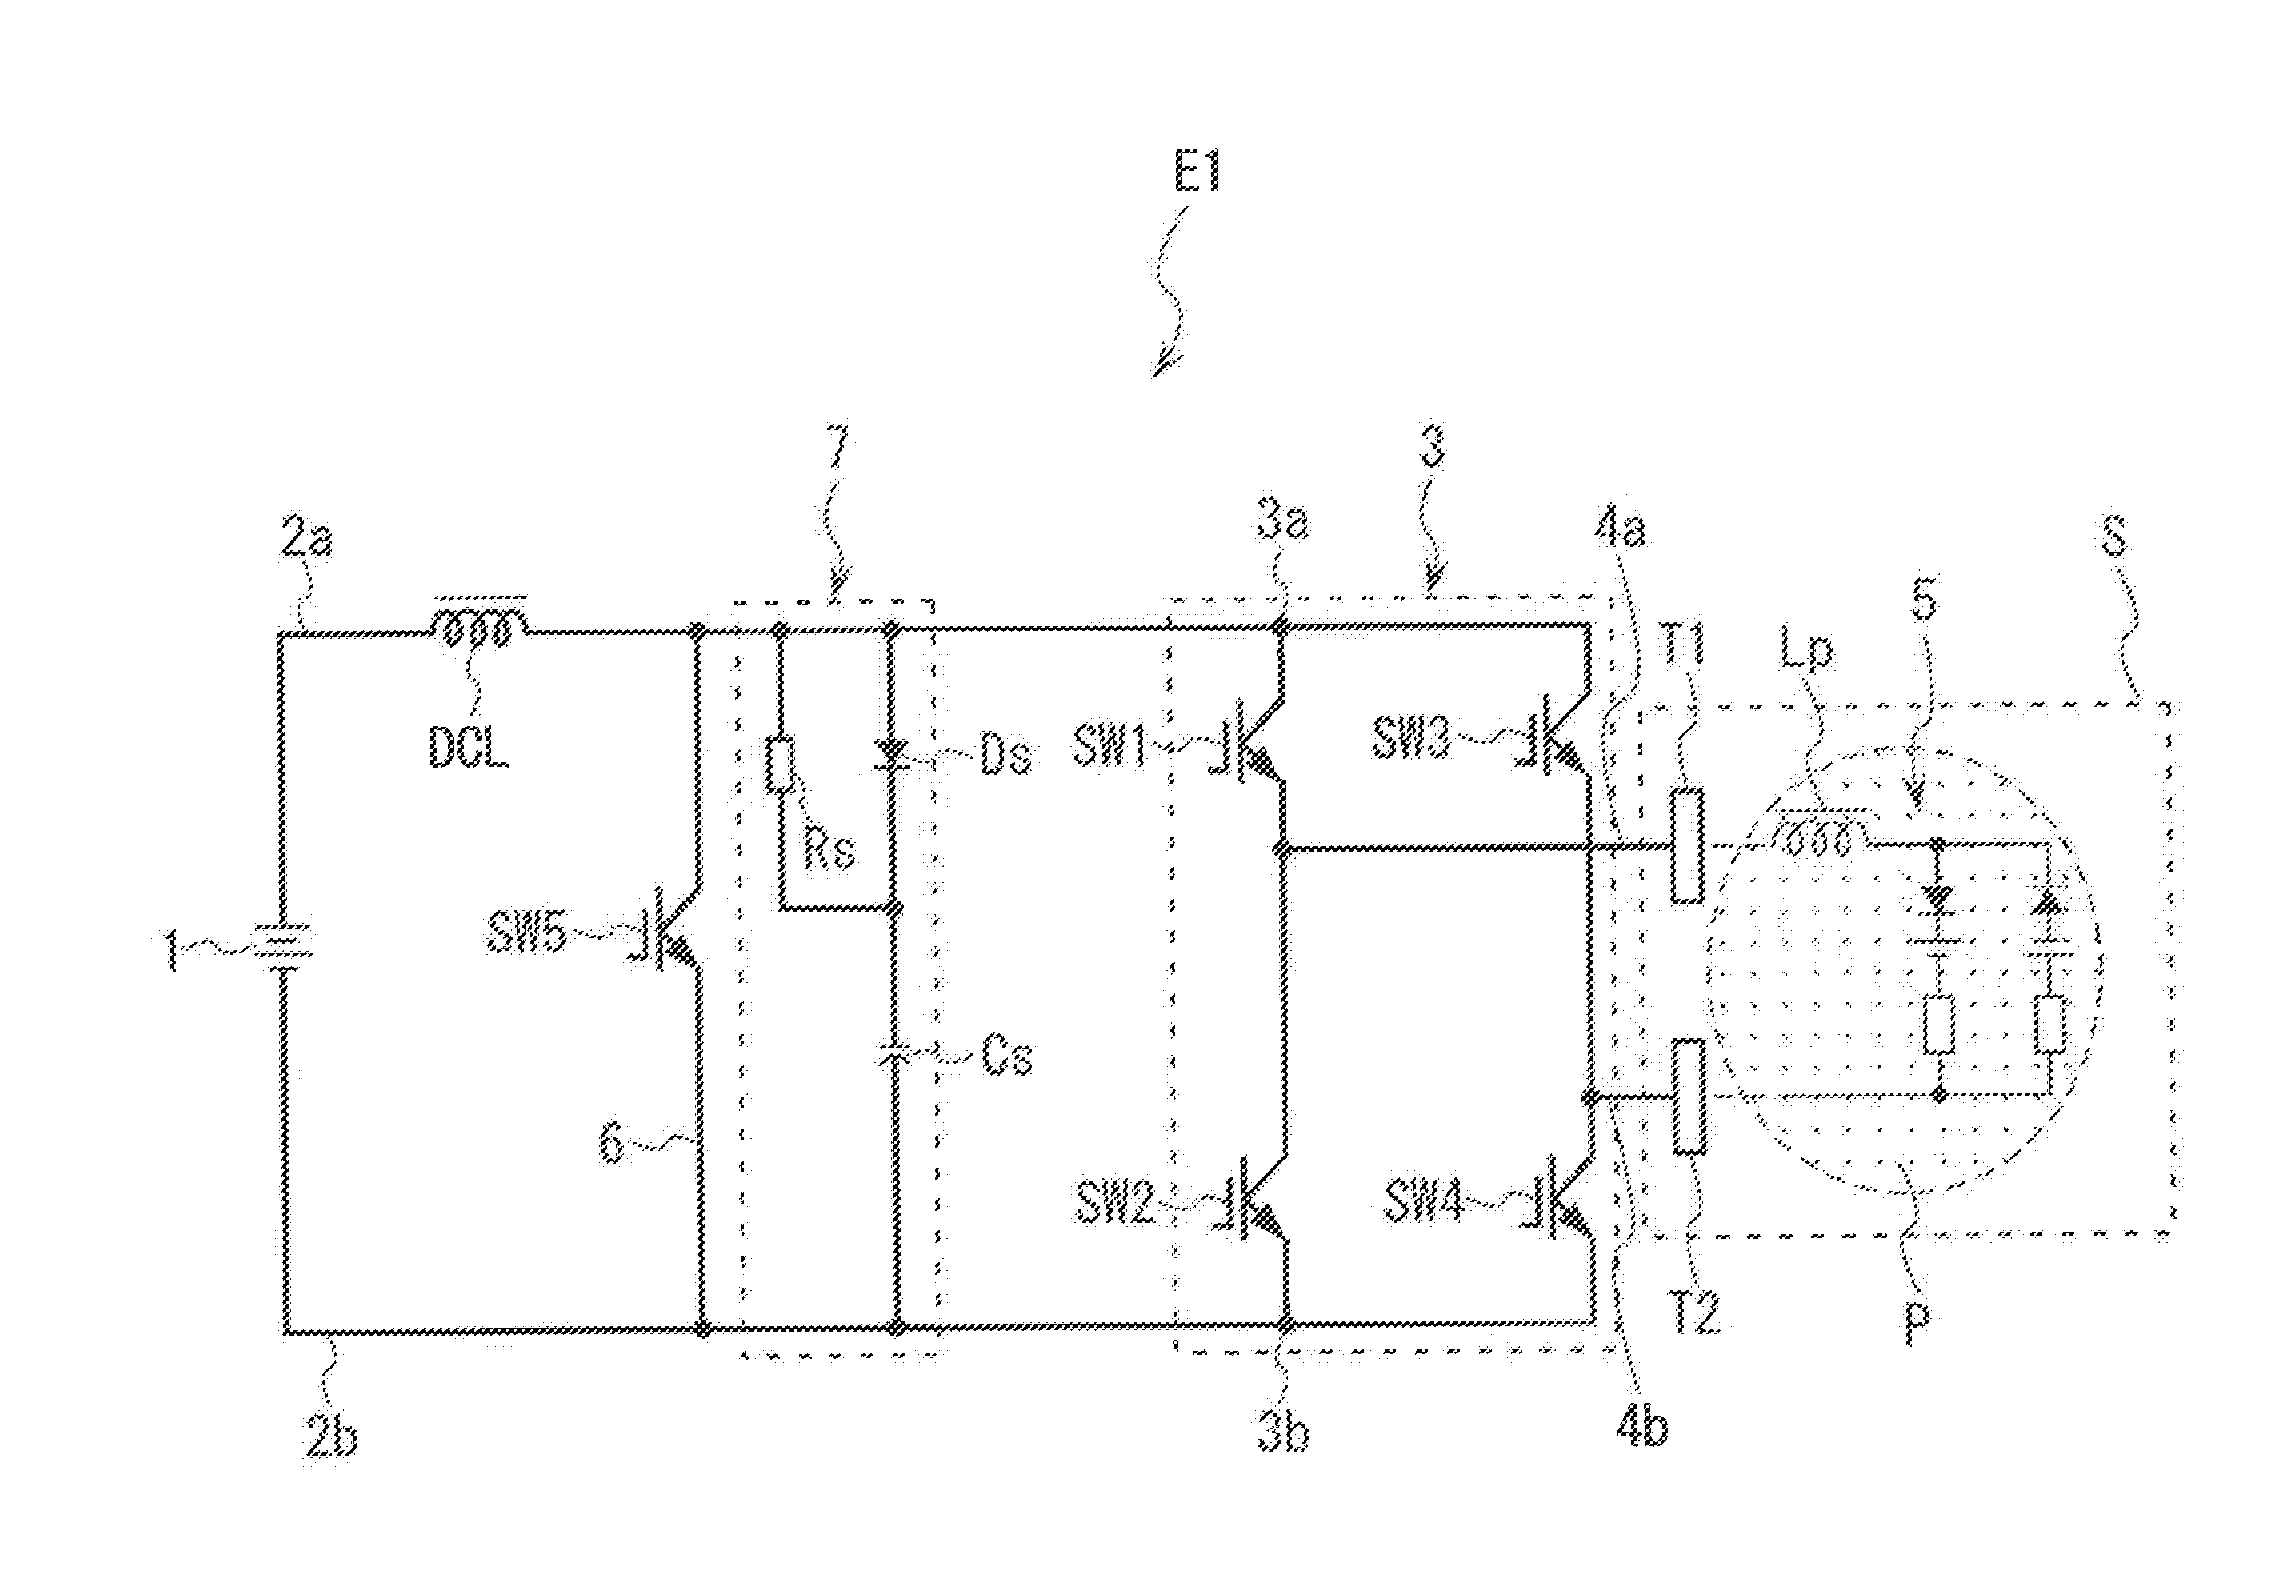 Ac power supply for sputtering apparatus